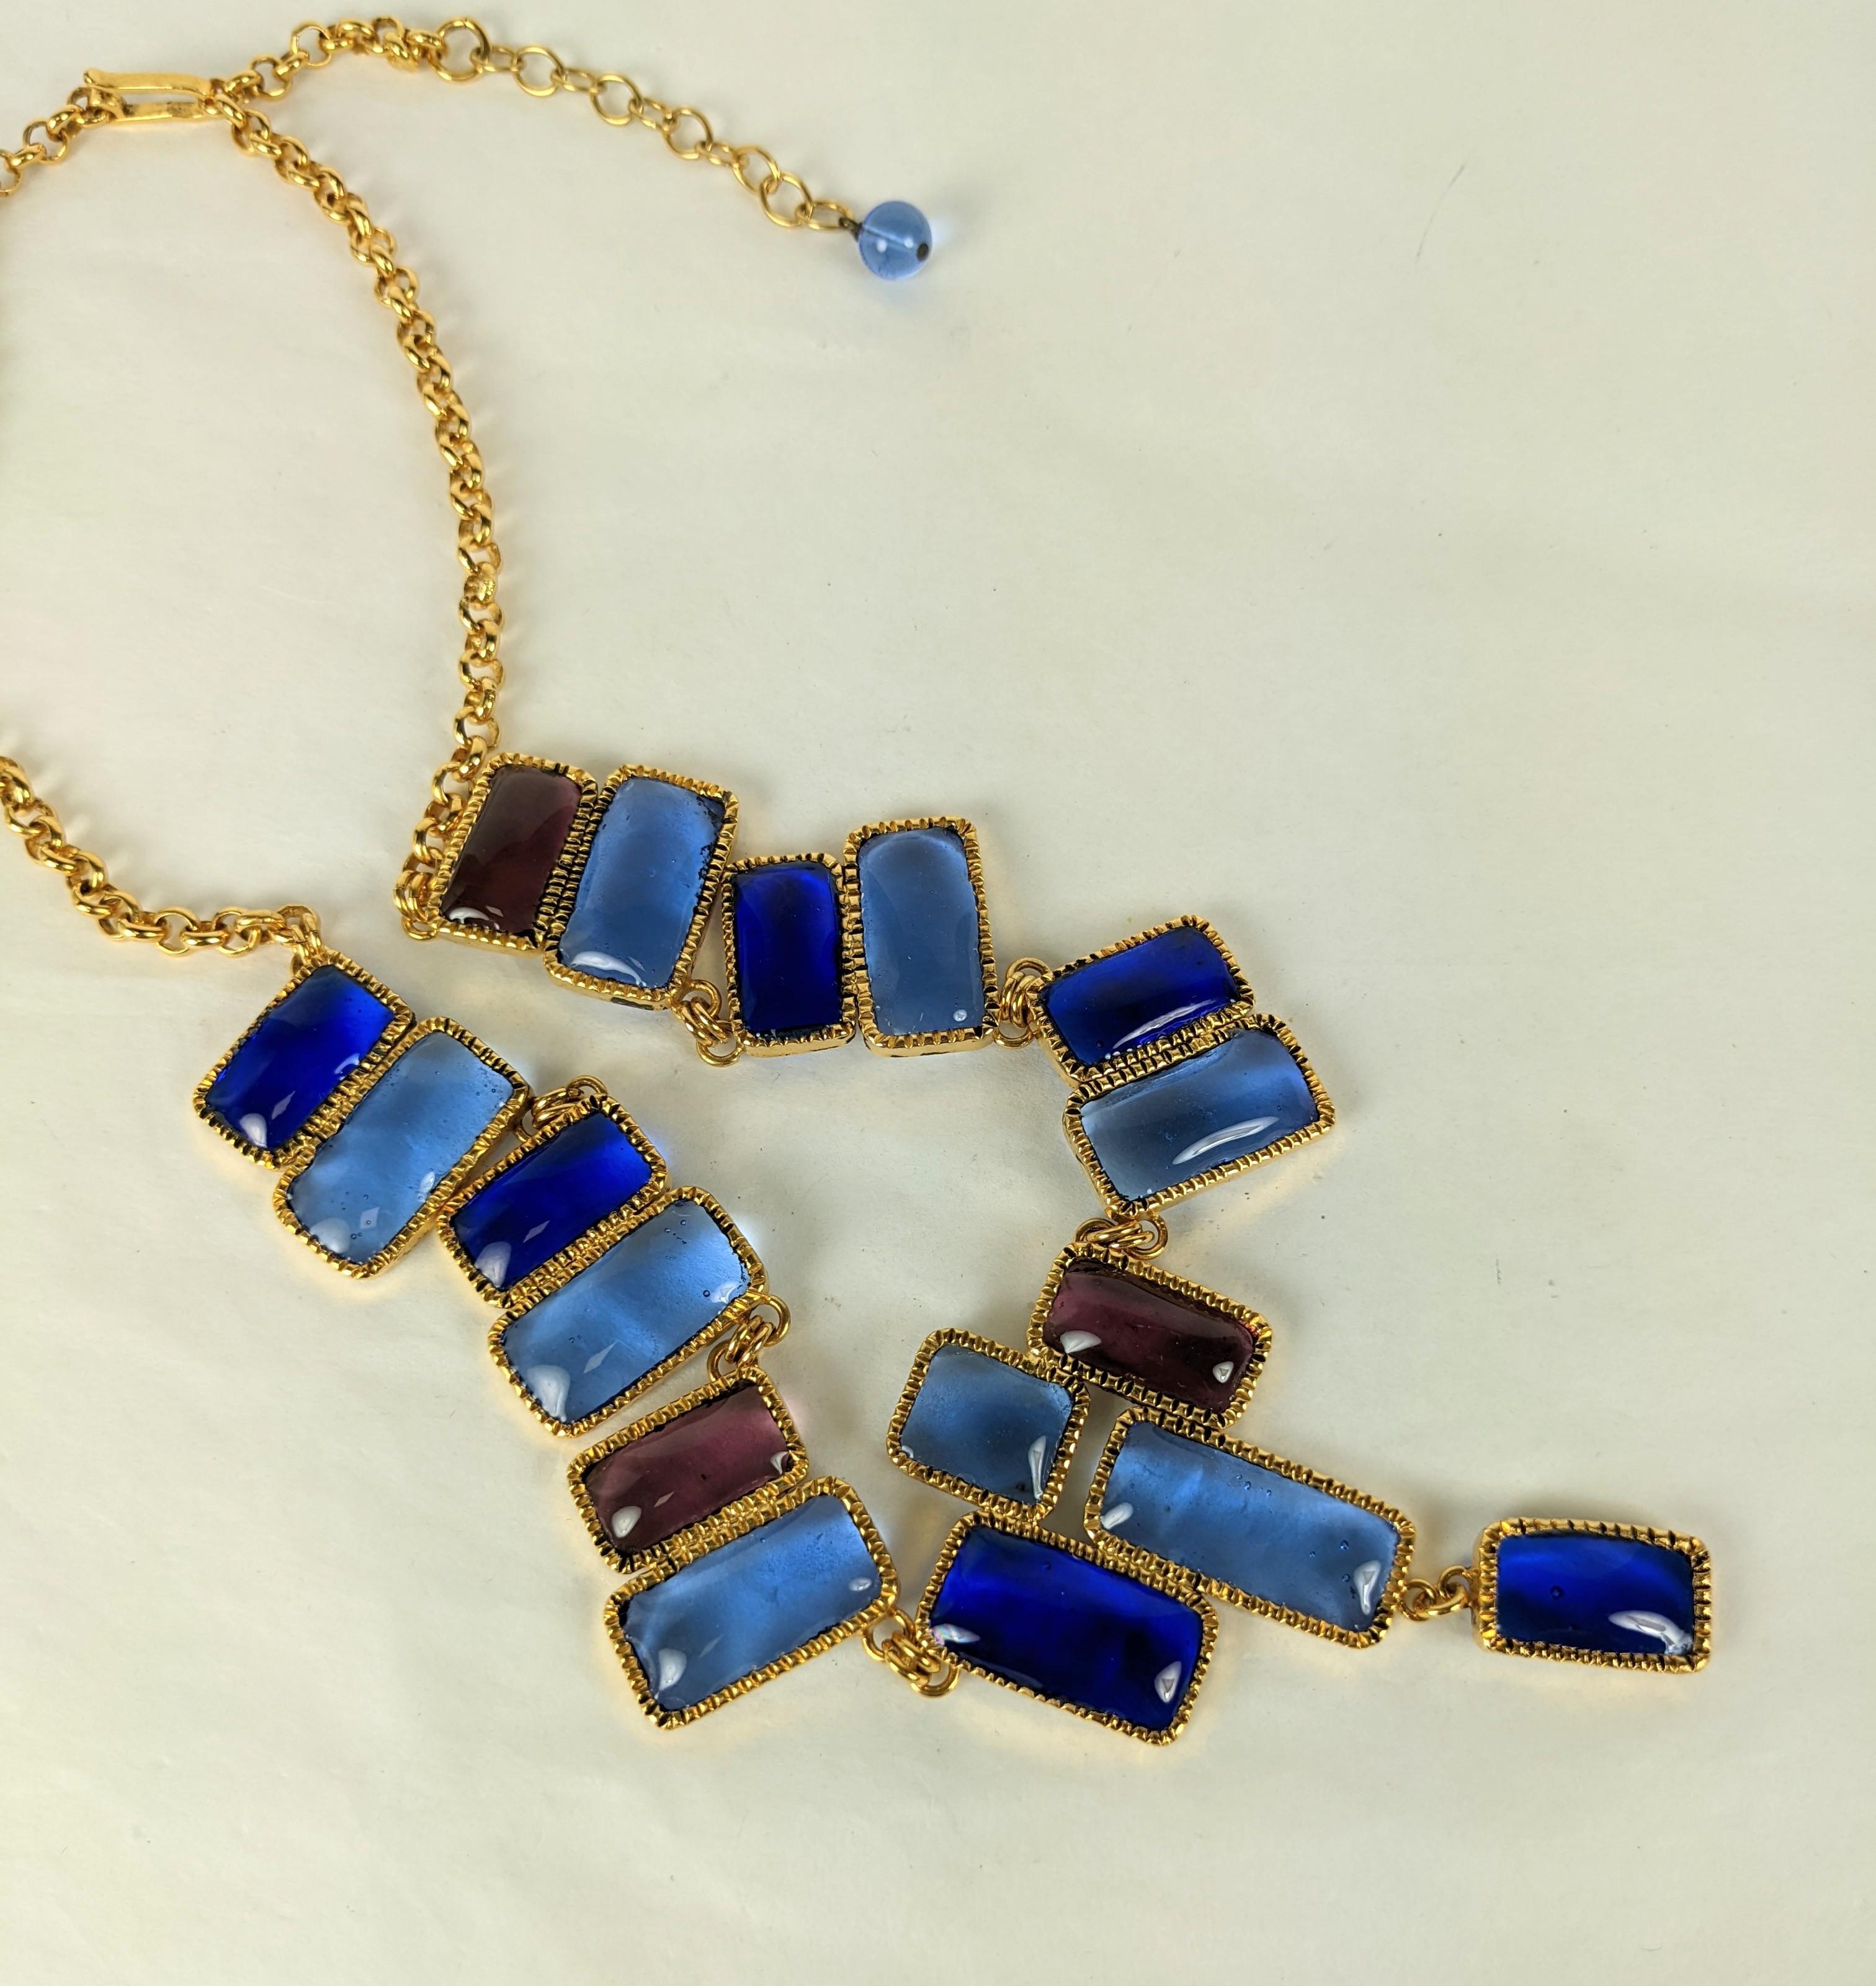 Yves Saint Laurent Mondrian Gripoix Glass Necklace In Excellent Condition For Sale In New York, NY